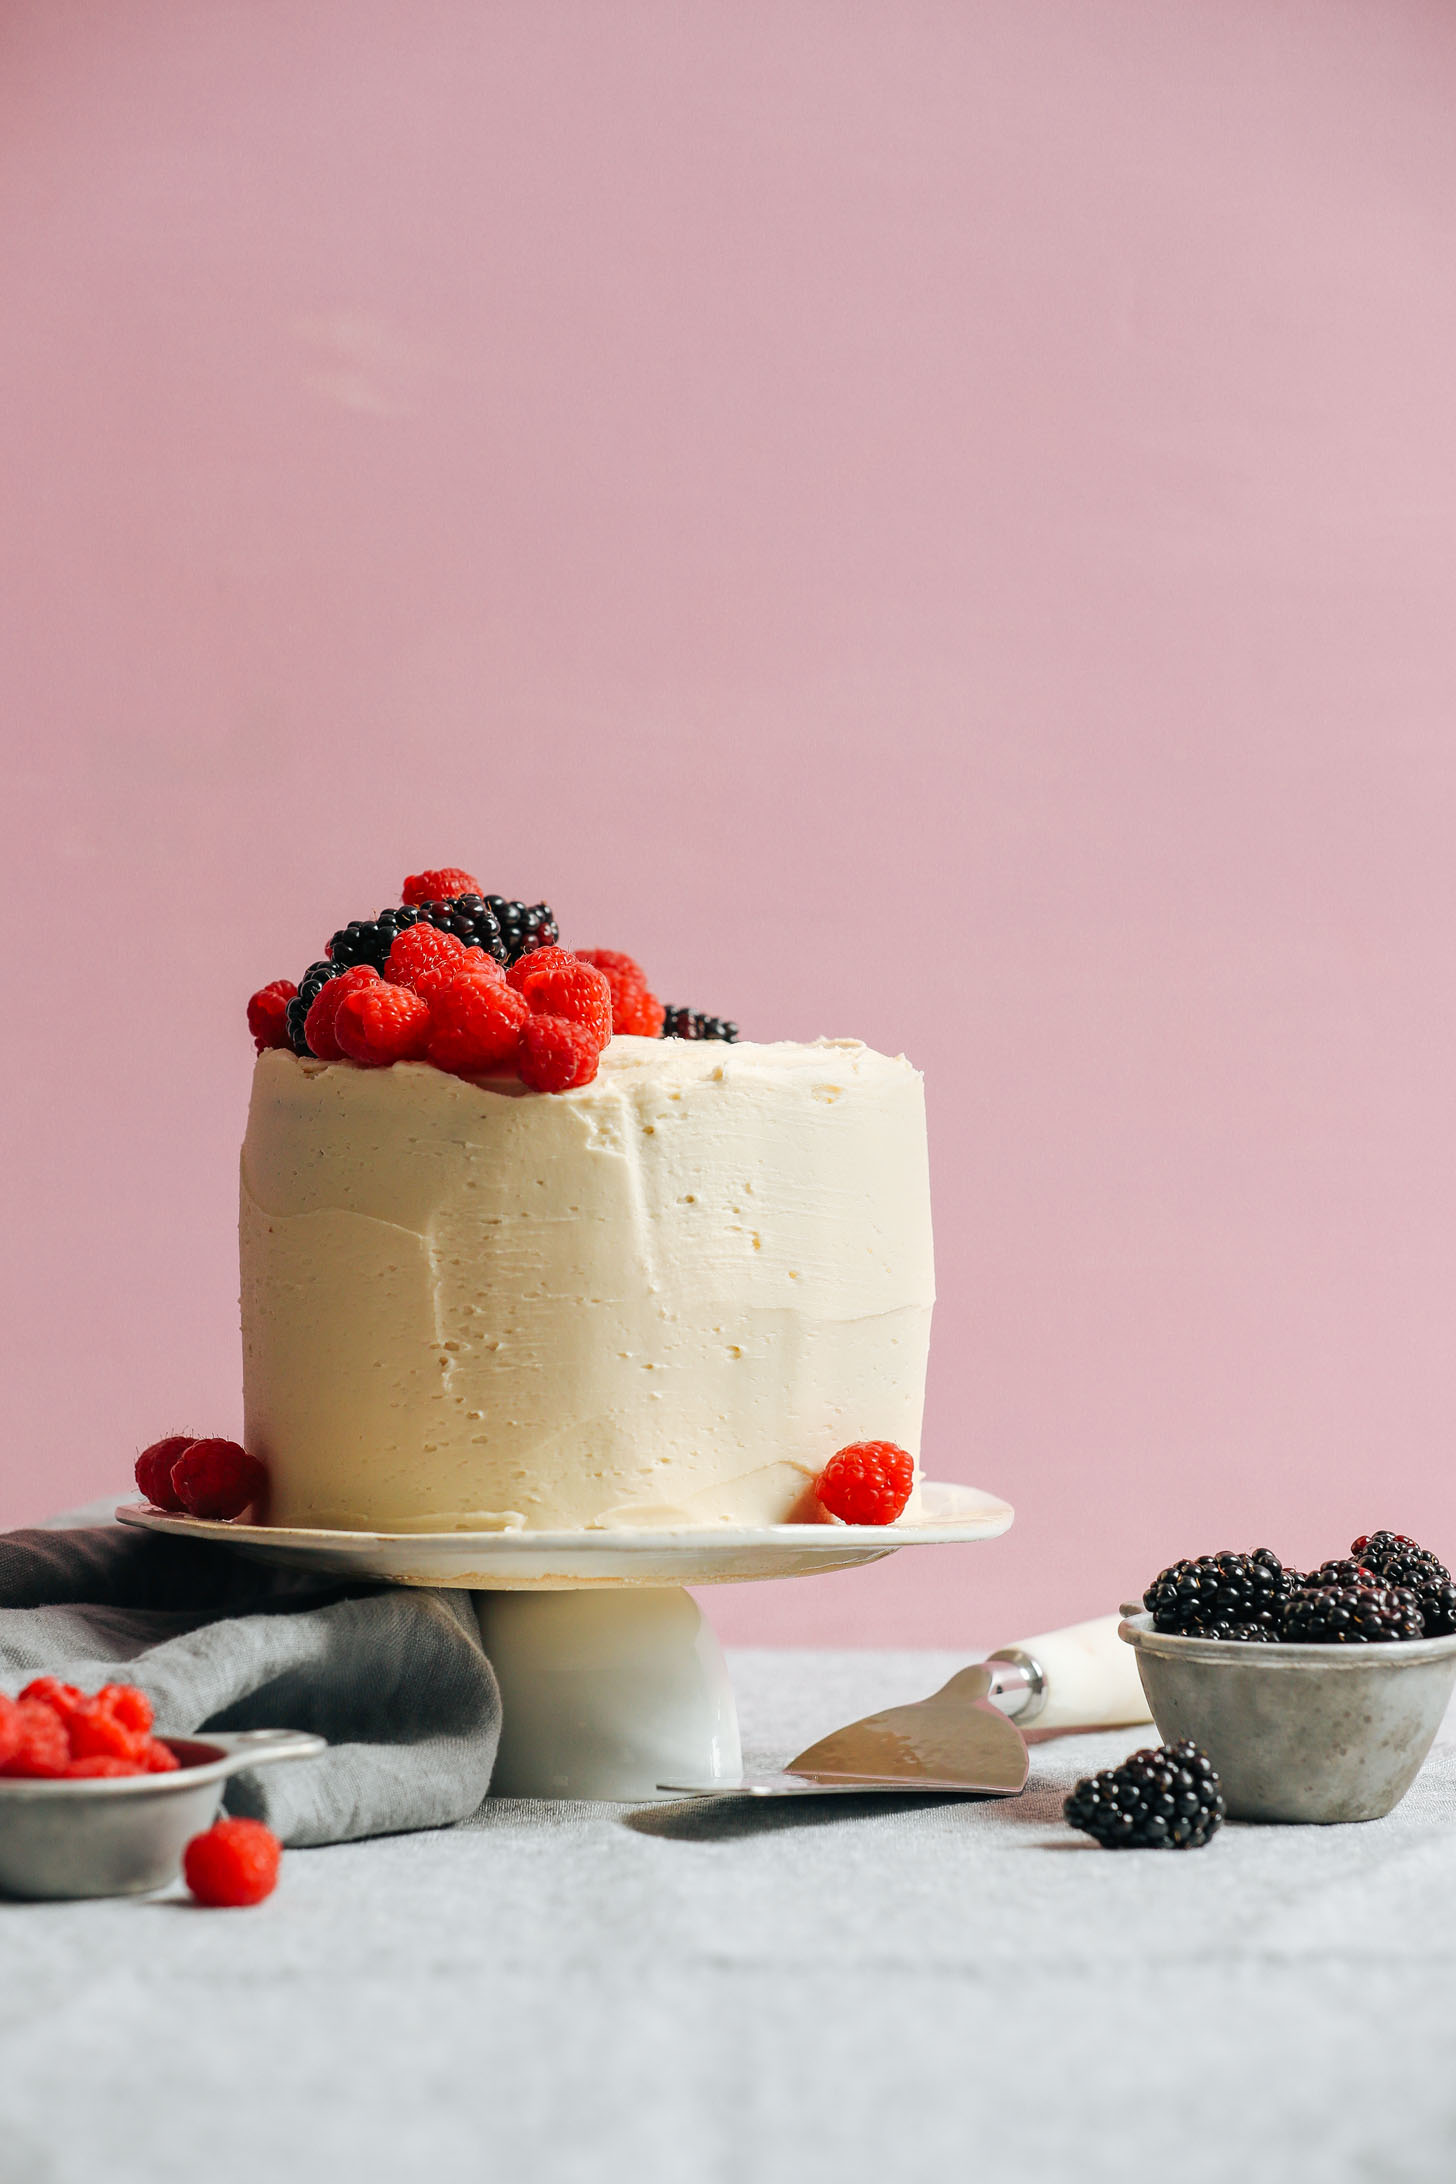 Our perfectly frosted 1-Bowl Vegan Gluten-Free Vanilla Cake perched atop a serving platter and decorated with fresh berries